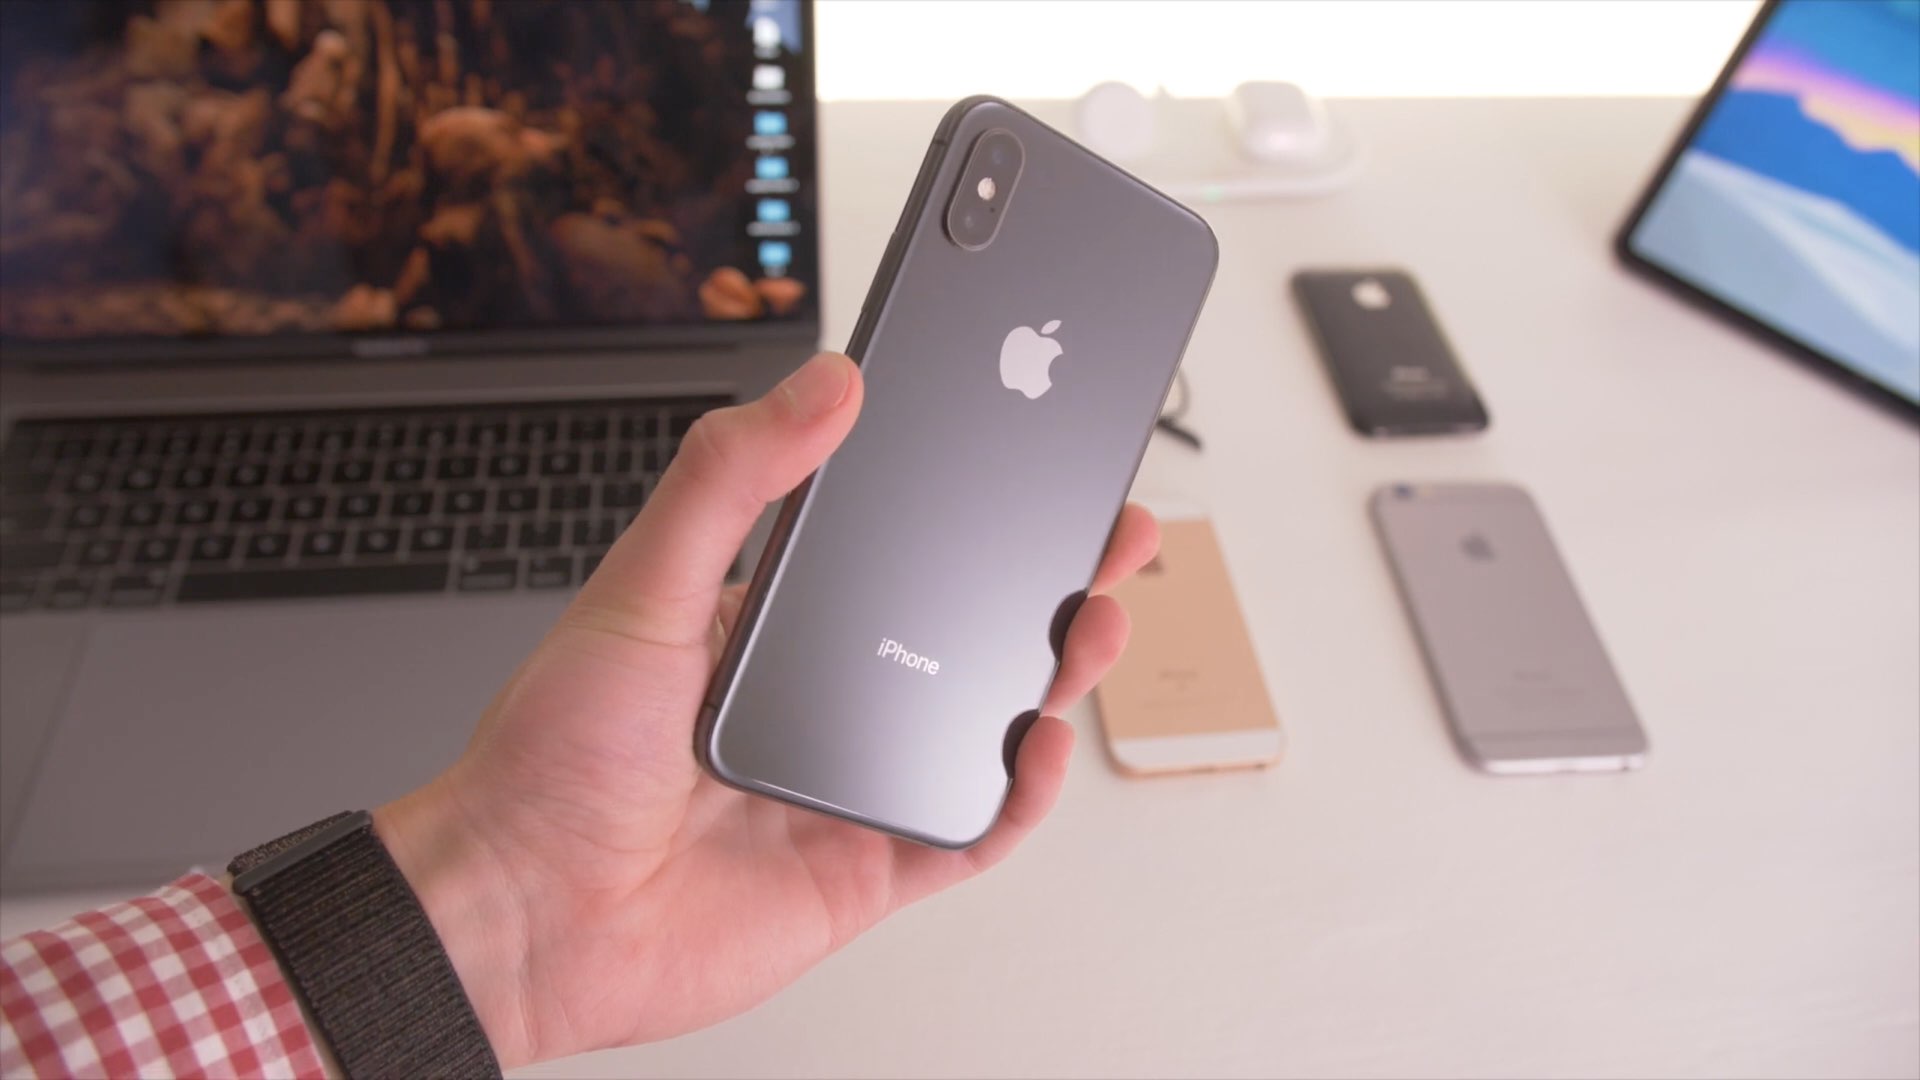 iPhone XS held in a young person's hand with a work desk seen blurred in the background